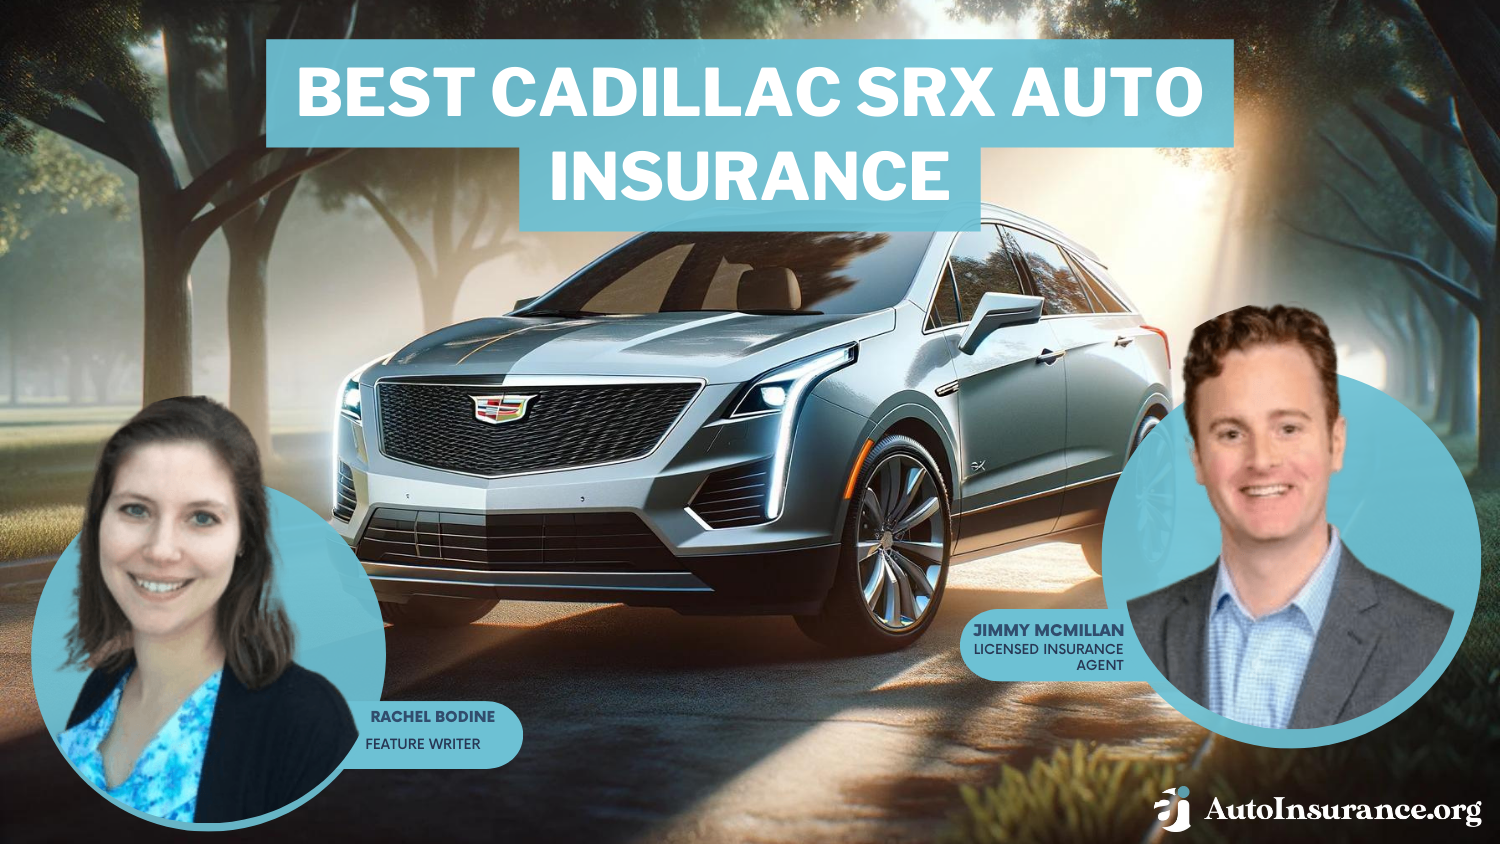 Best Cadillac SRX Auto Insurance: Travelers, USAA, and Farmers.